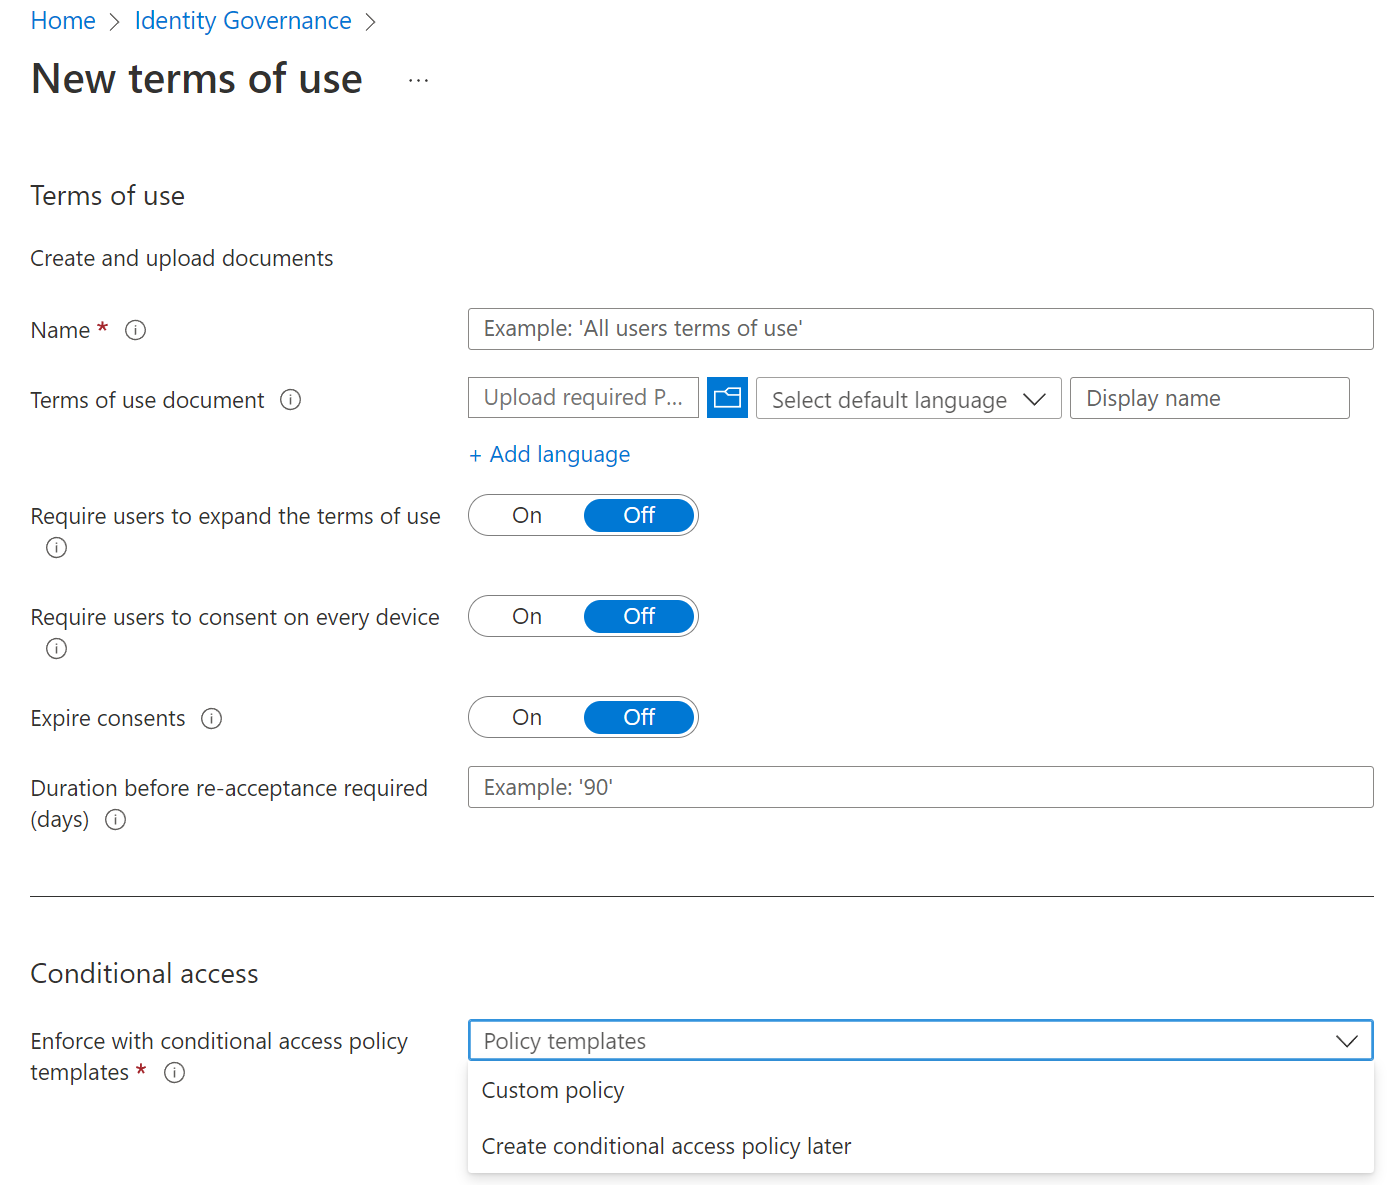 Screenshot of the Identity Governance dialog to create new Terms of Use for your cloud solutions.